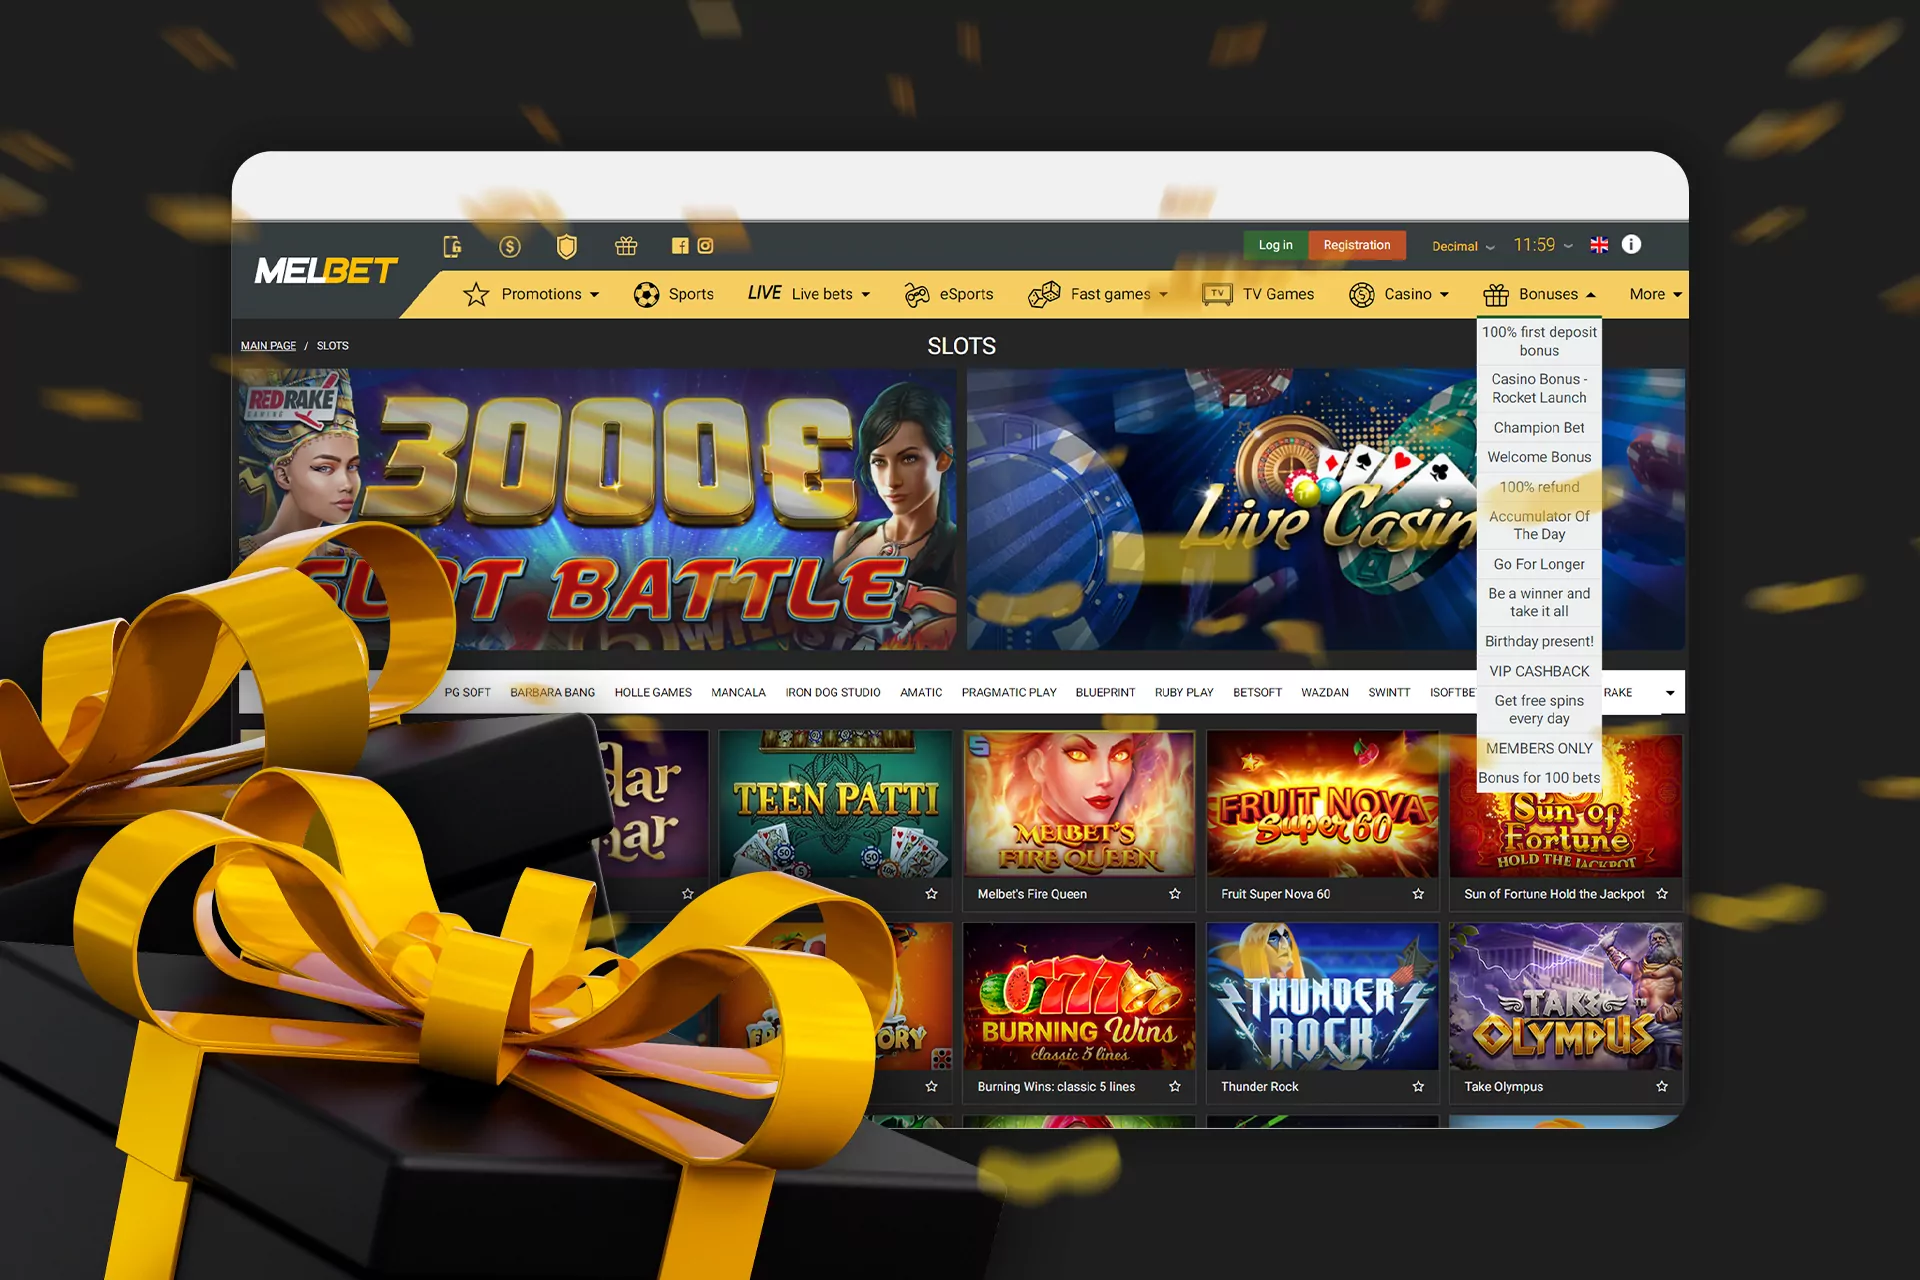 Melbet online casino has bonuses for existing players.